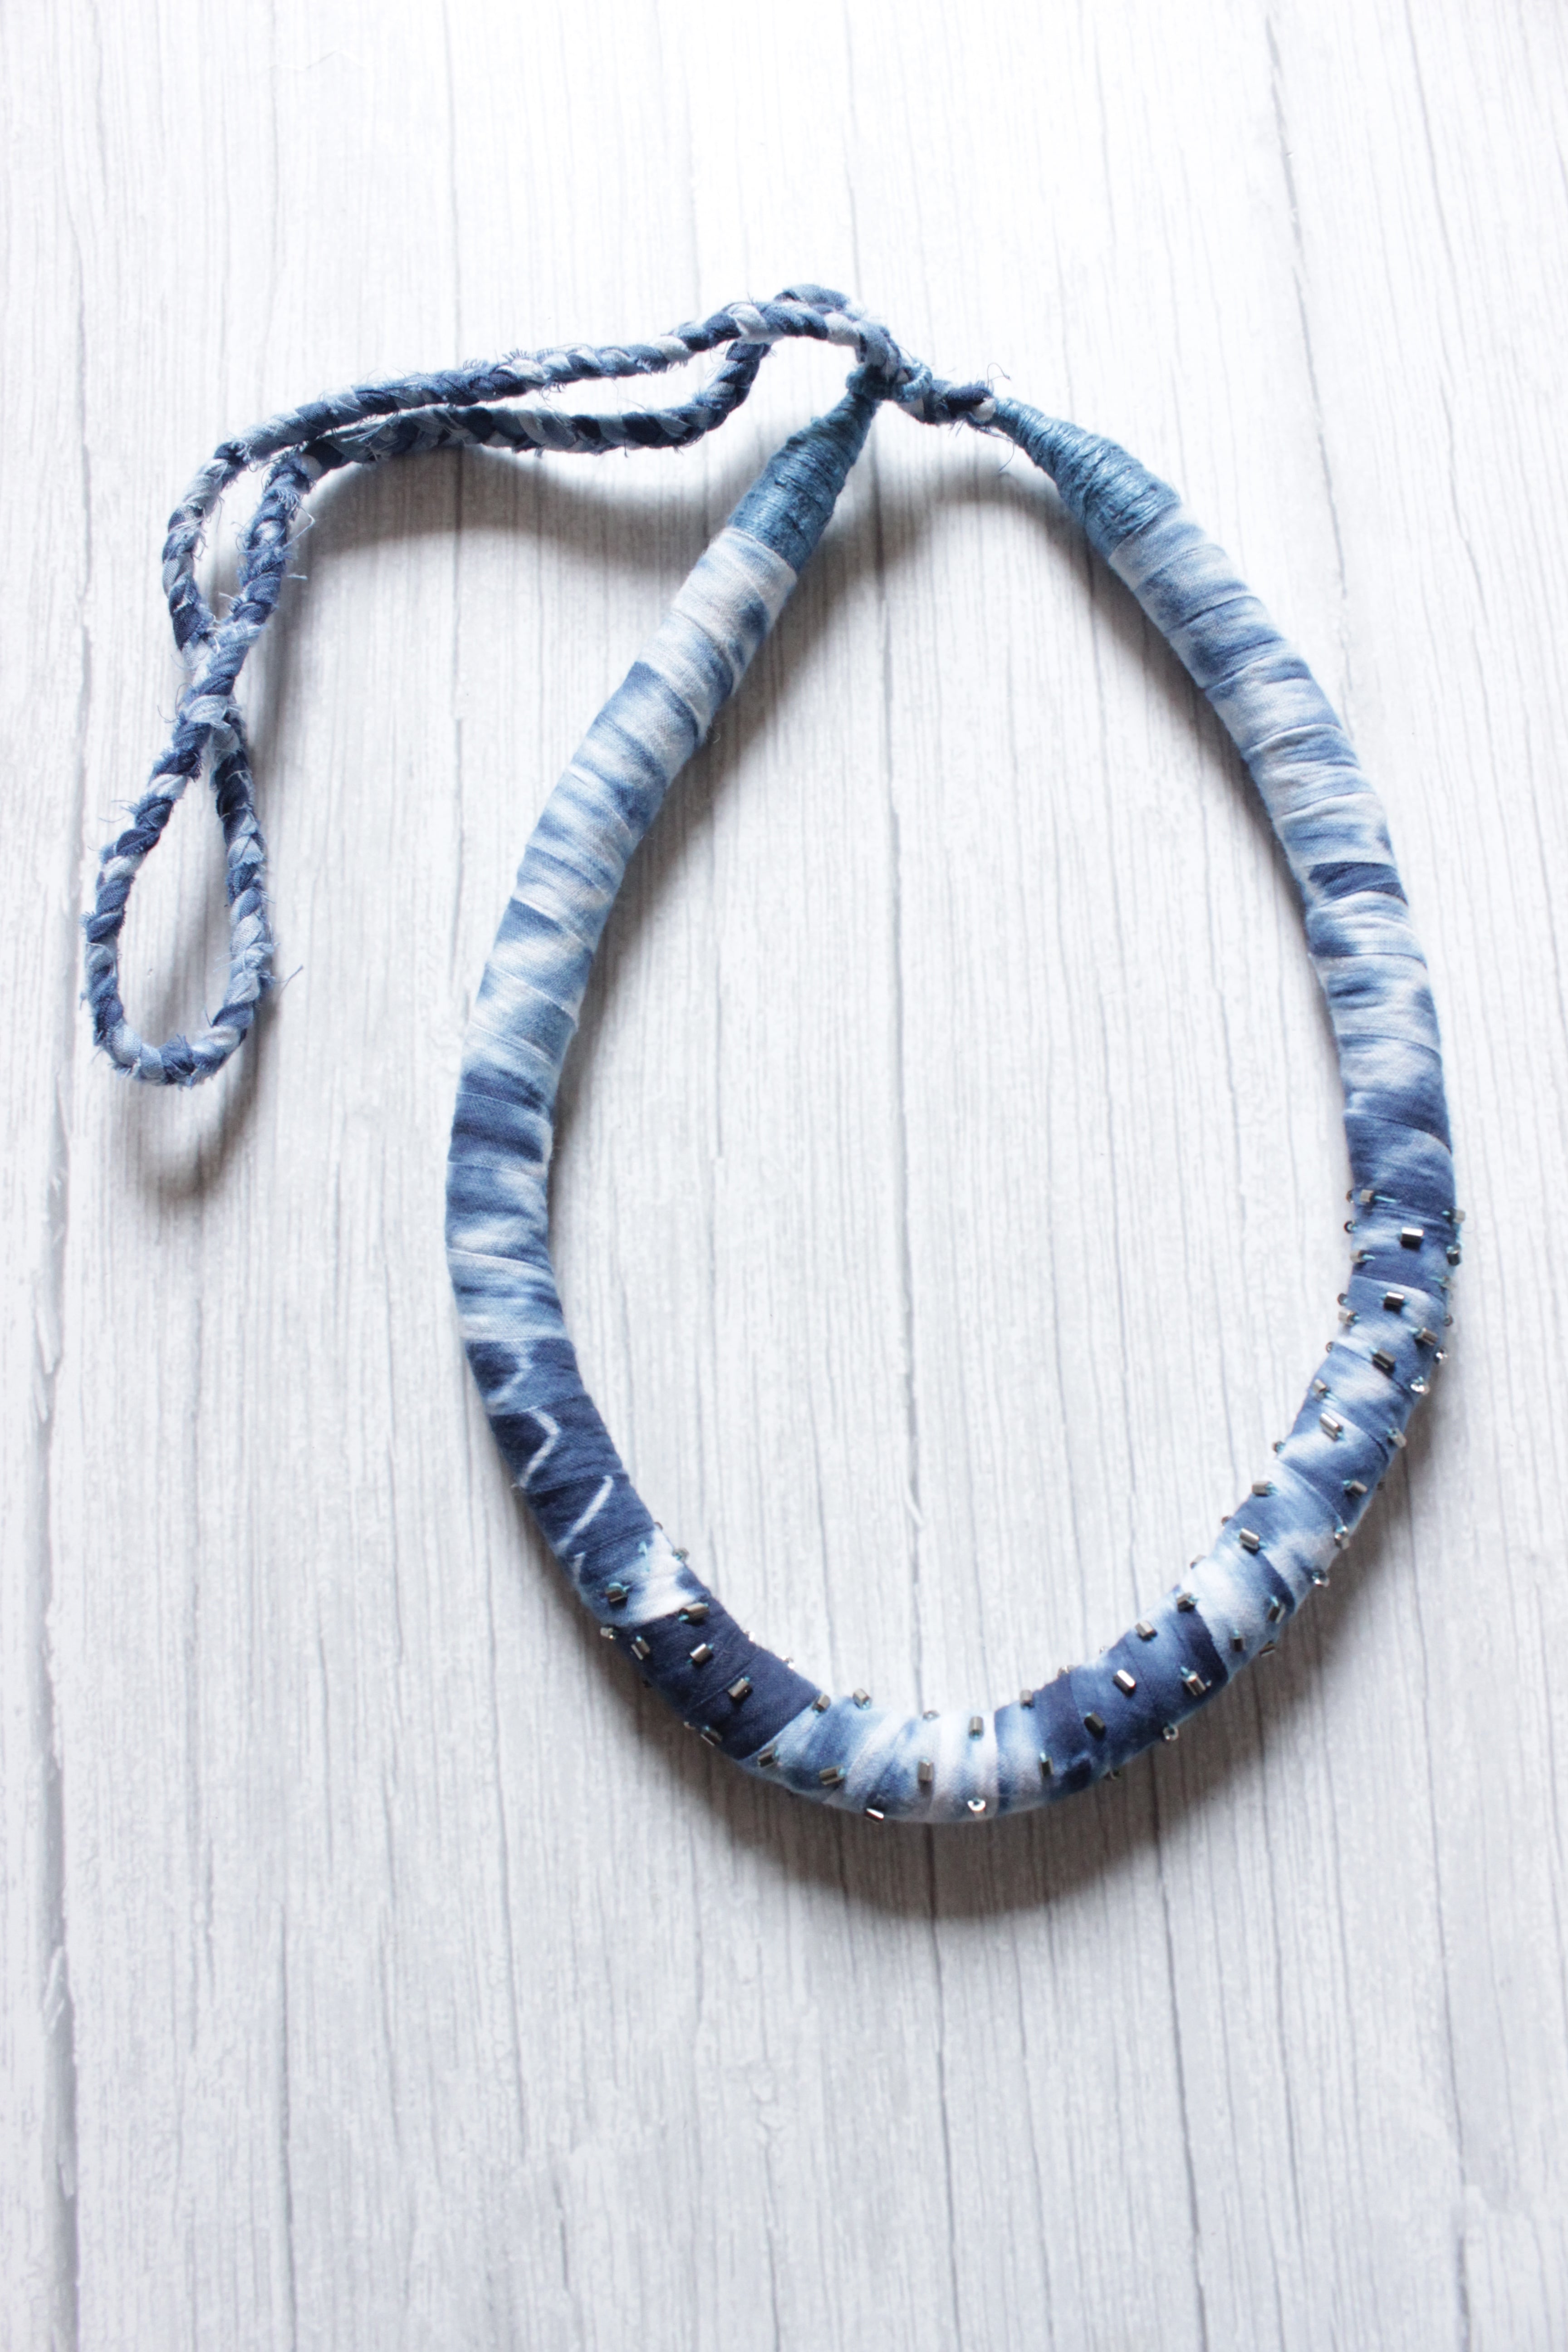 Handcrafted Natural Dyed Indigo Fabric Choker Necklace